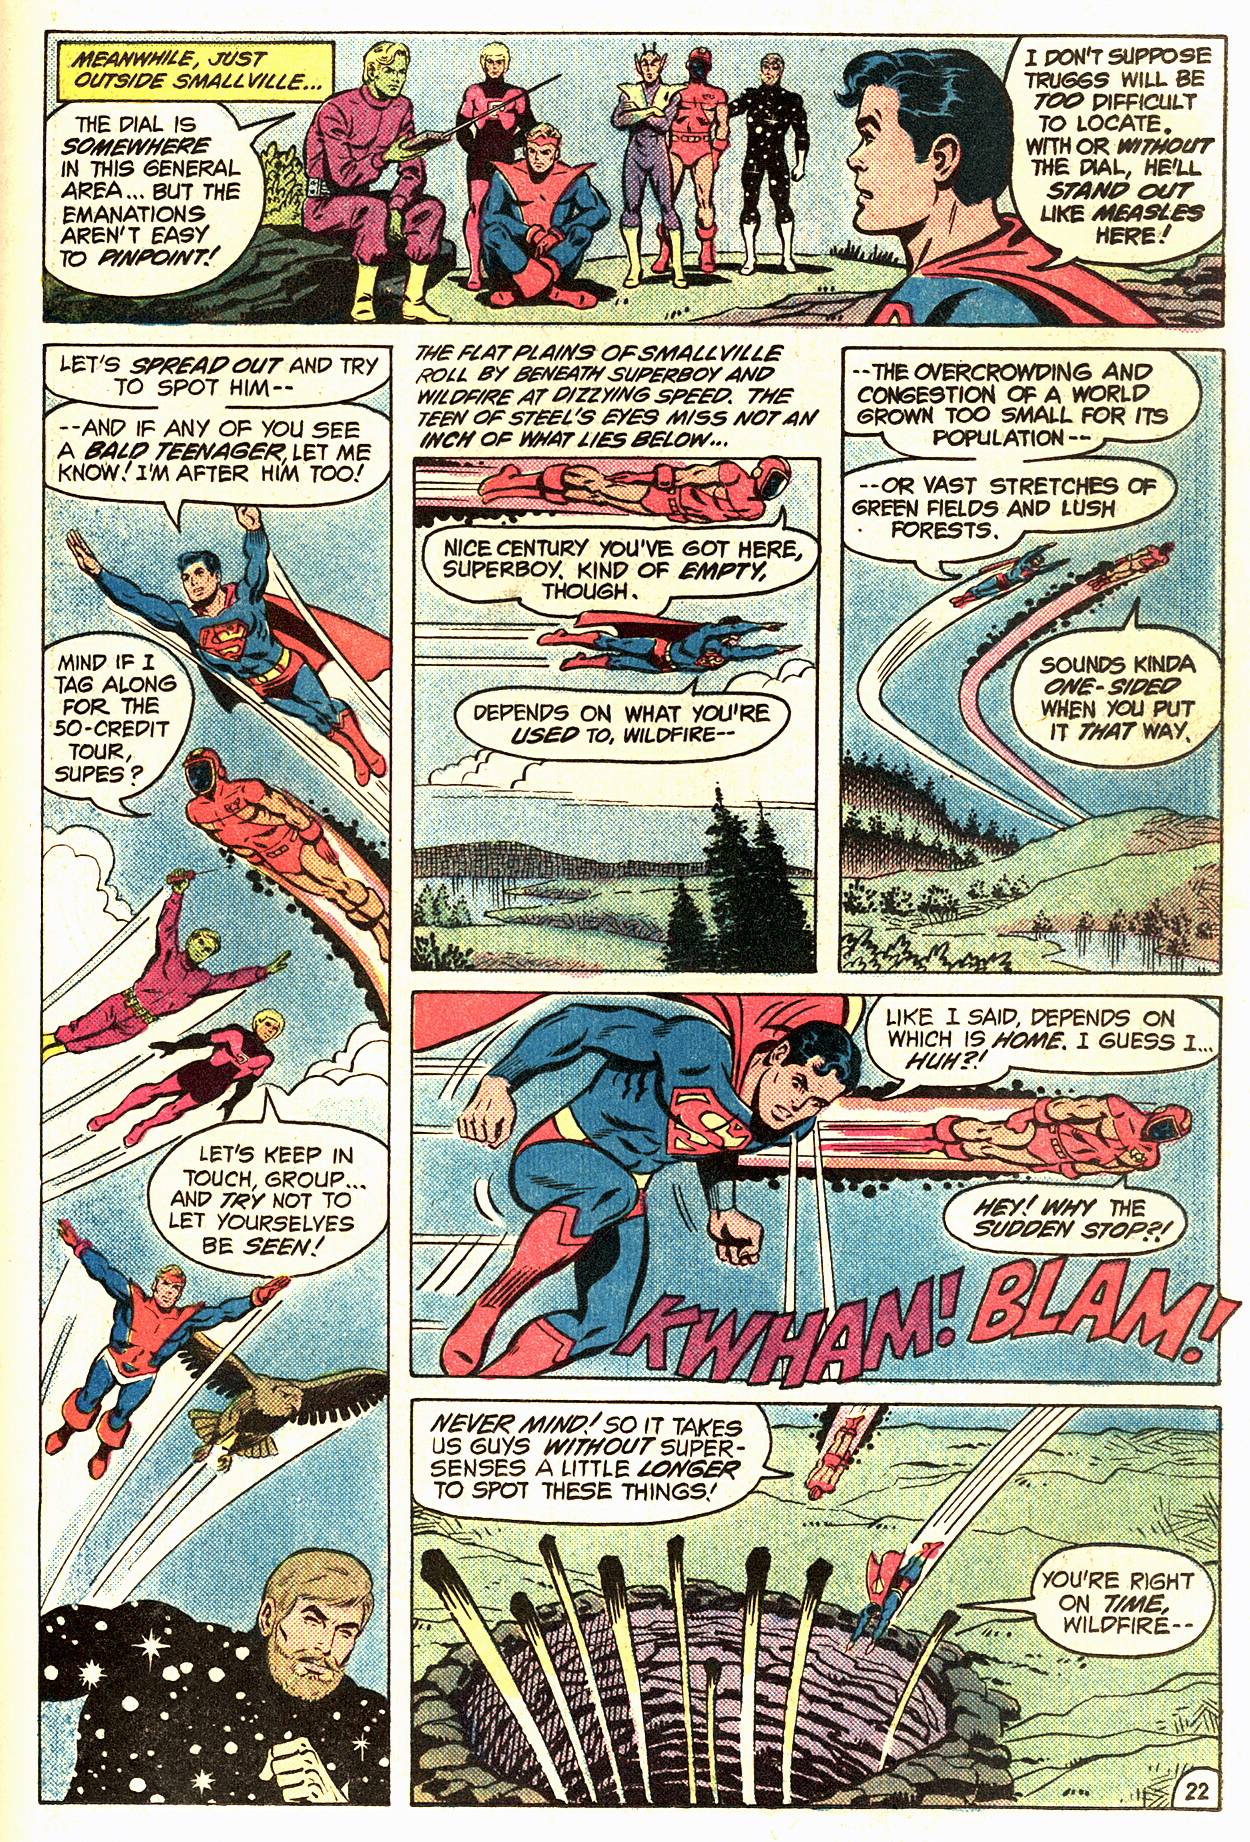 The New Adventures of Superboy 50 Page 22